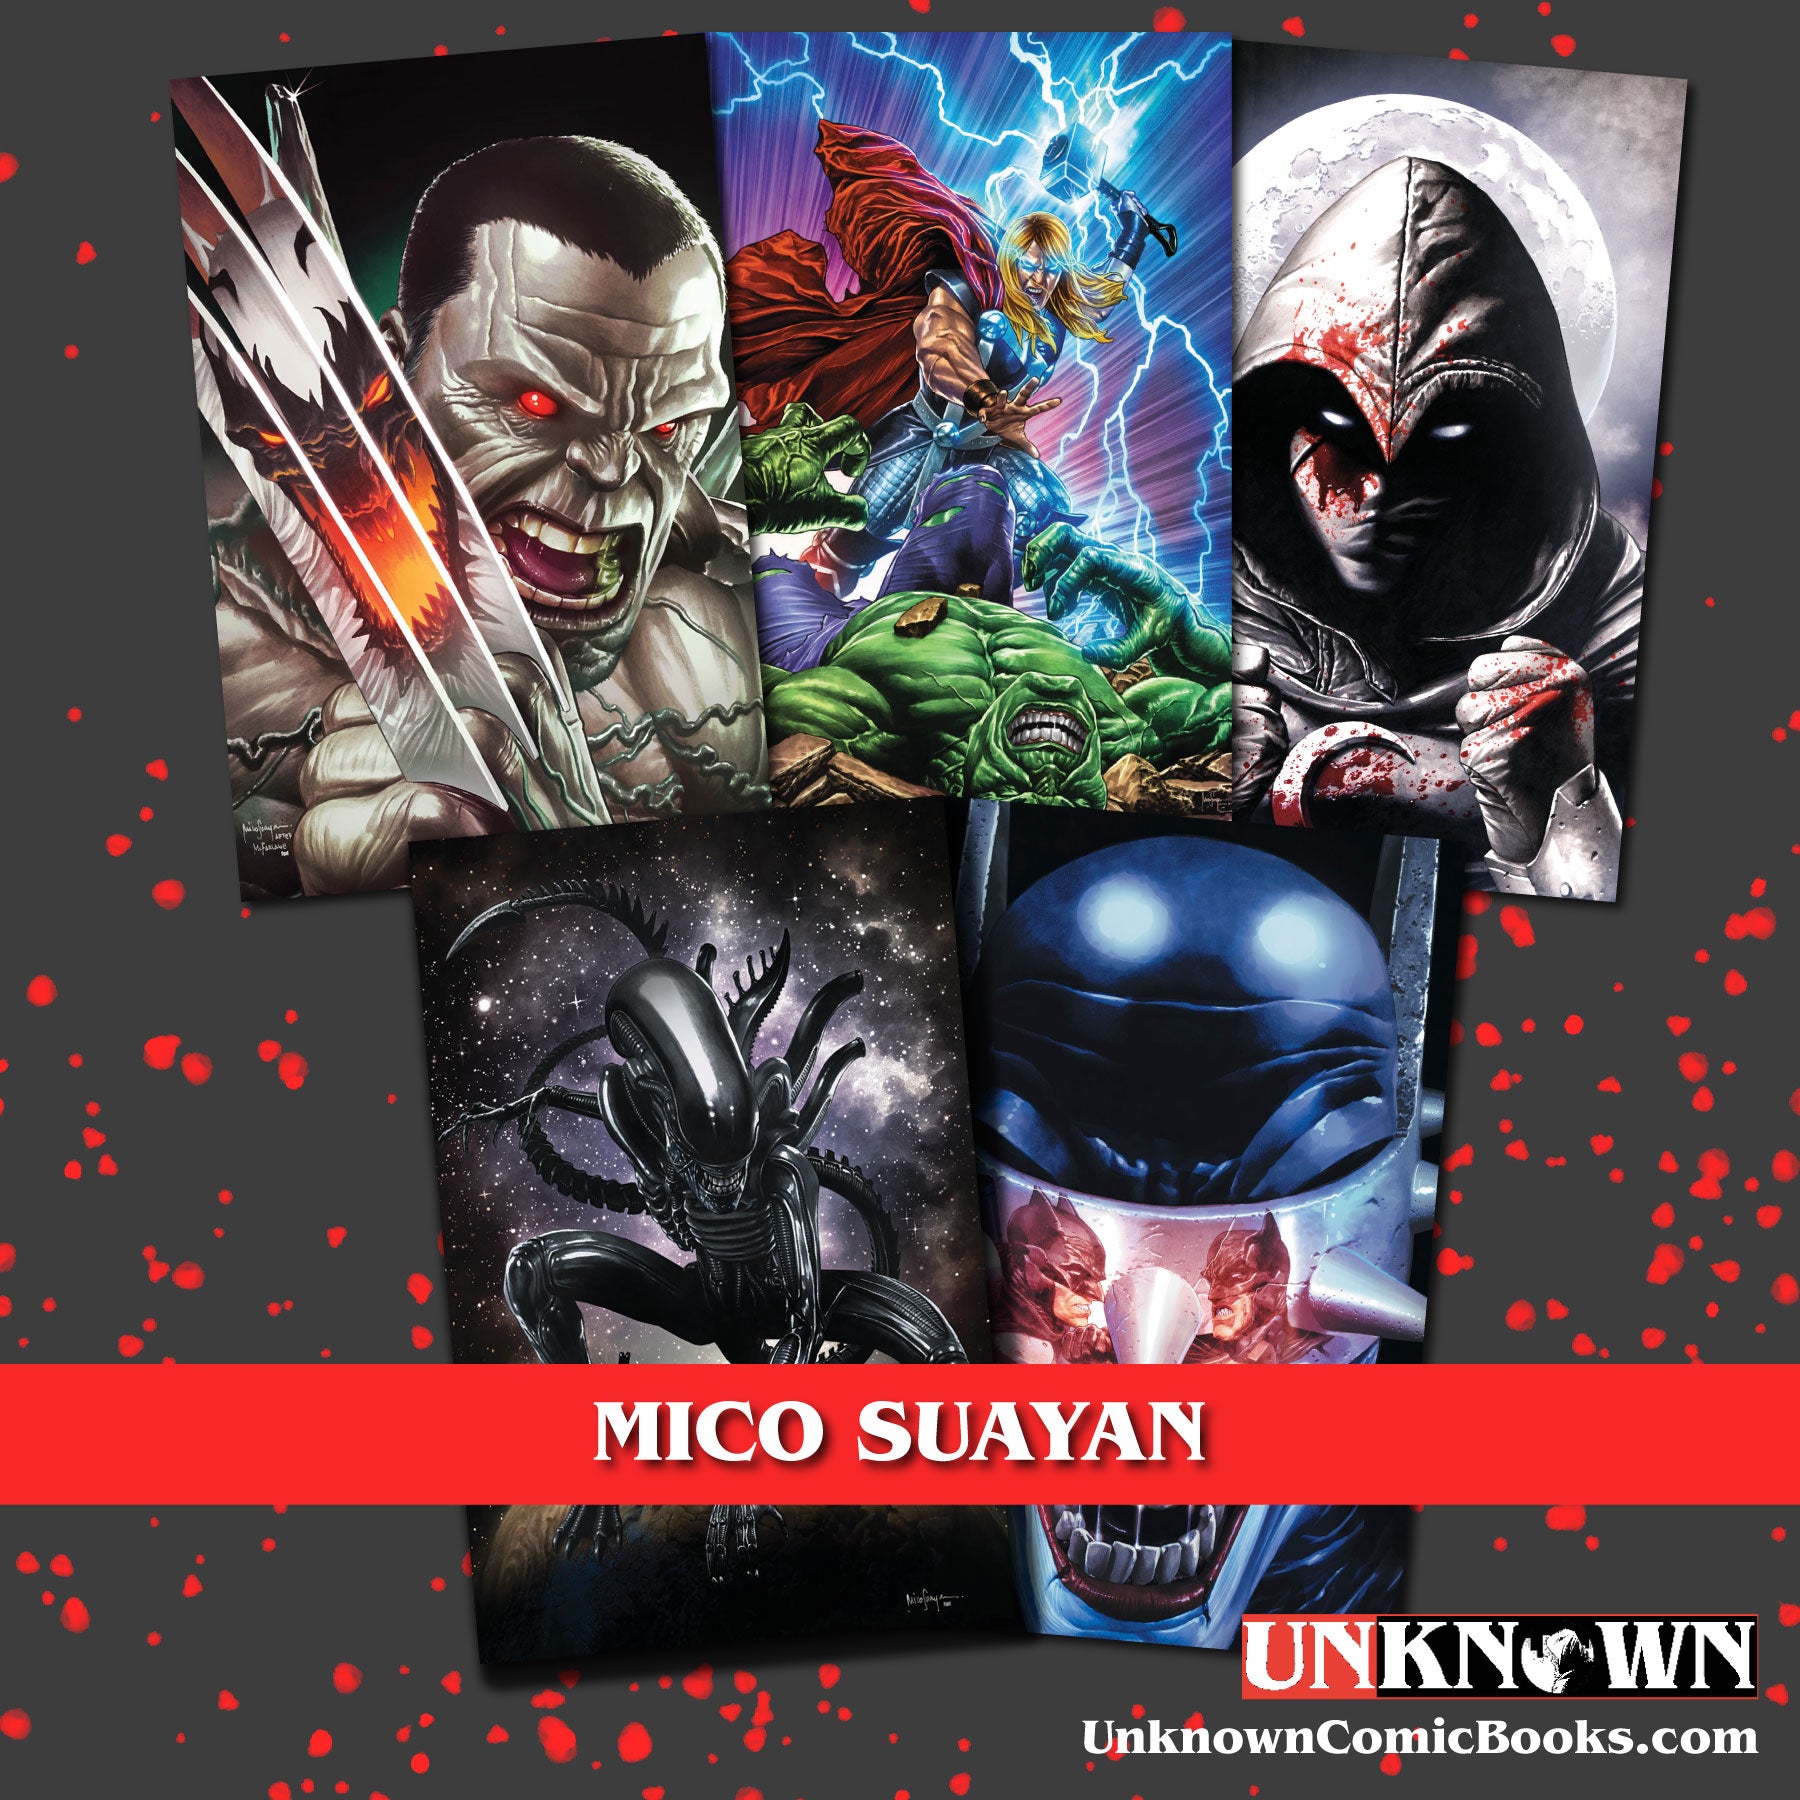 [5 PACK] UNKNOWN COMICS MYSTERY THEMED 👉🎨MICO SUAYAN ARTIST EXCLUSIVE BOX 👉VIRGIN (12/21/2022)